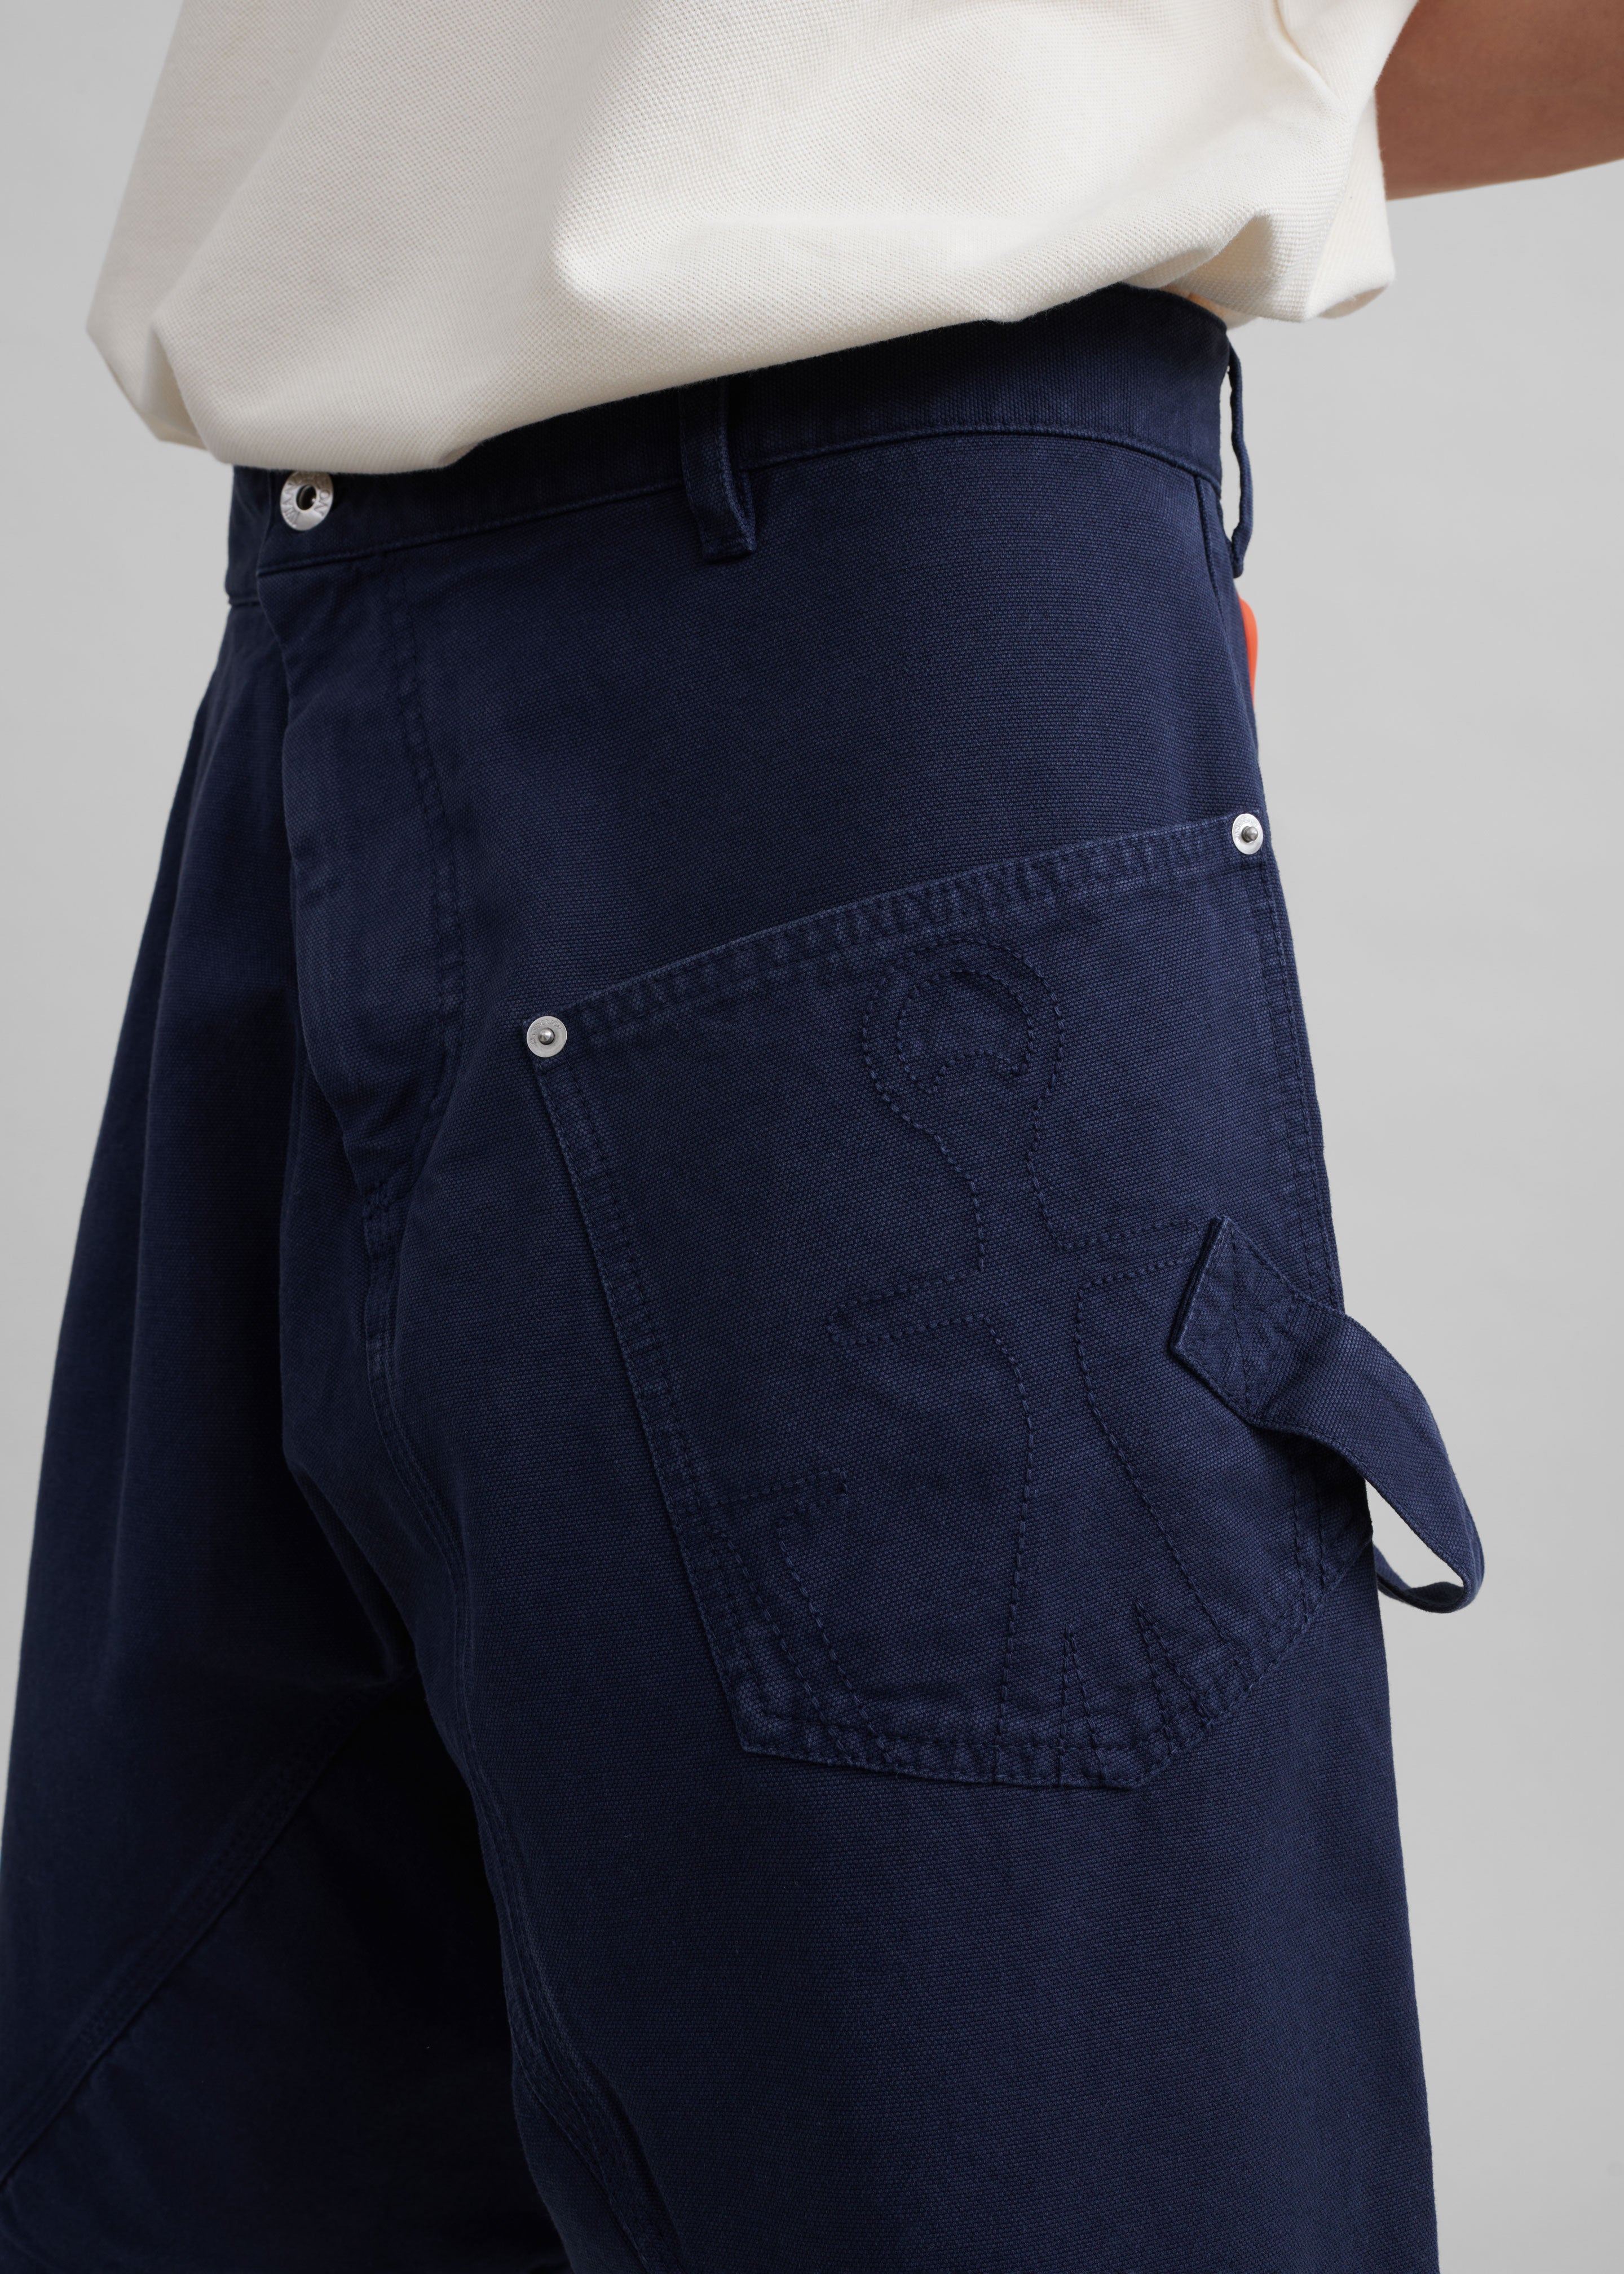 JW Anderson Twisted Shorts - Navy - 6